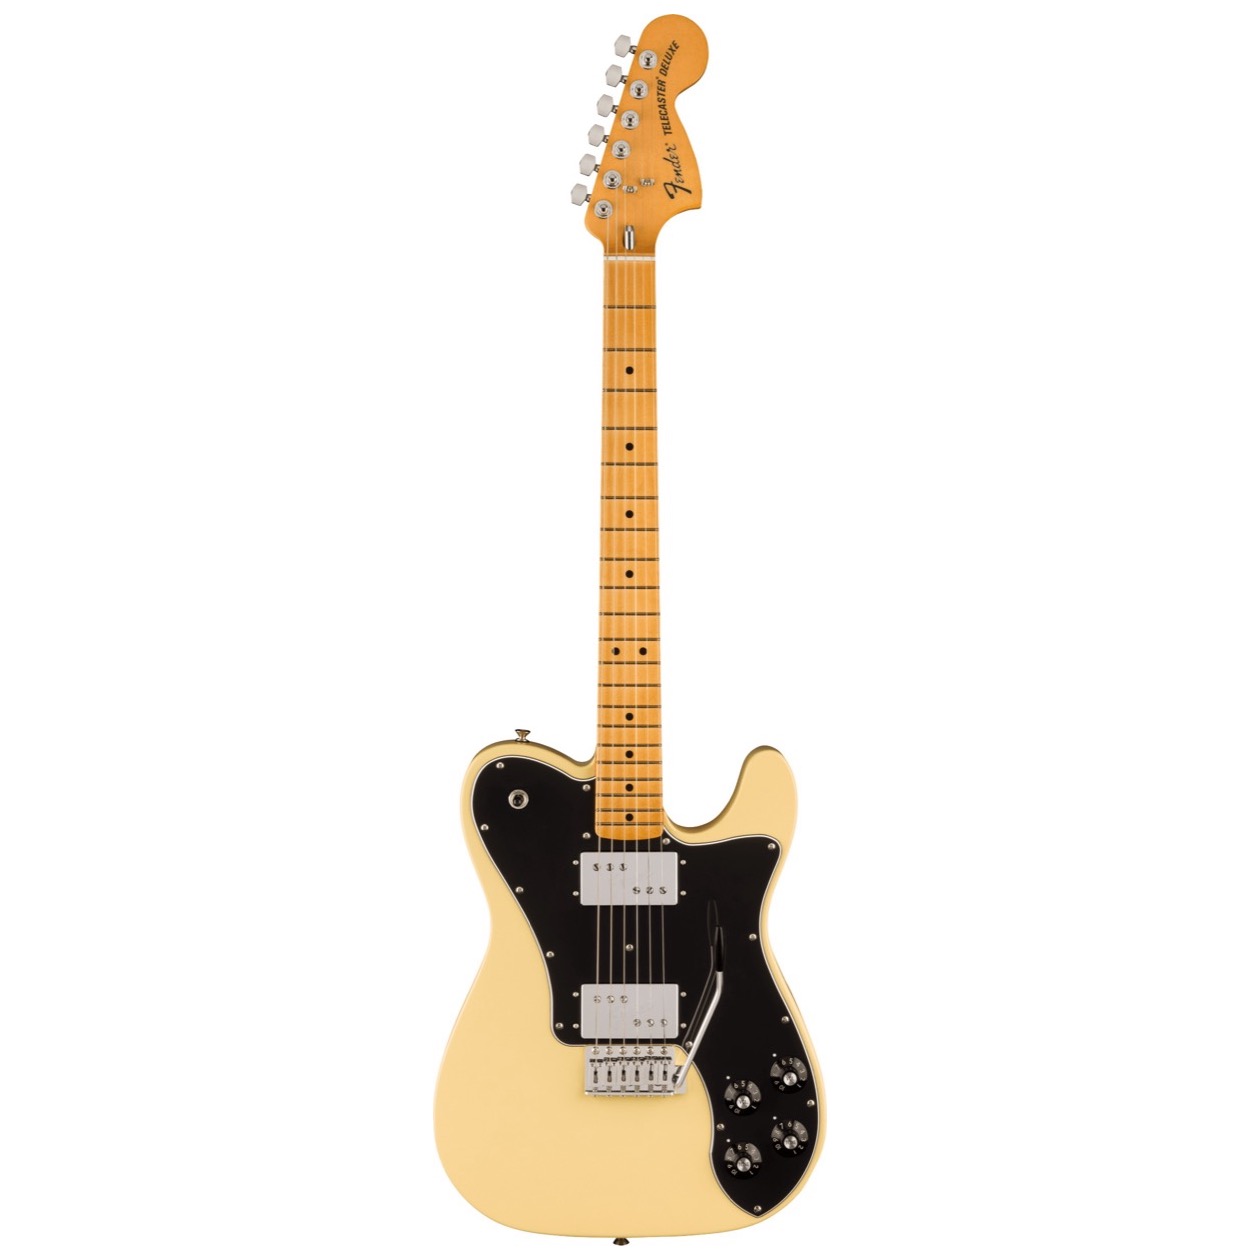 Fender Vintera II '70s Telecaster Deluxe with Tremolo, Maple Fingerboard, Vintage White inclusief Gig Bag